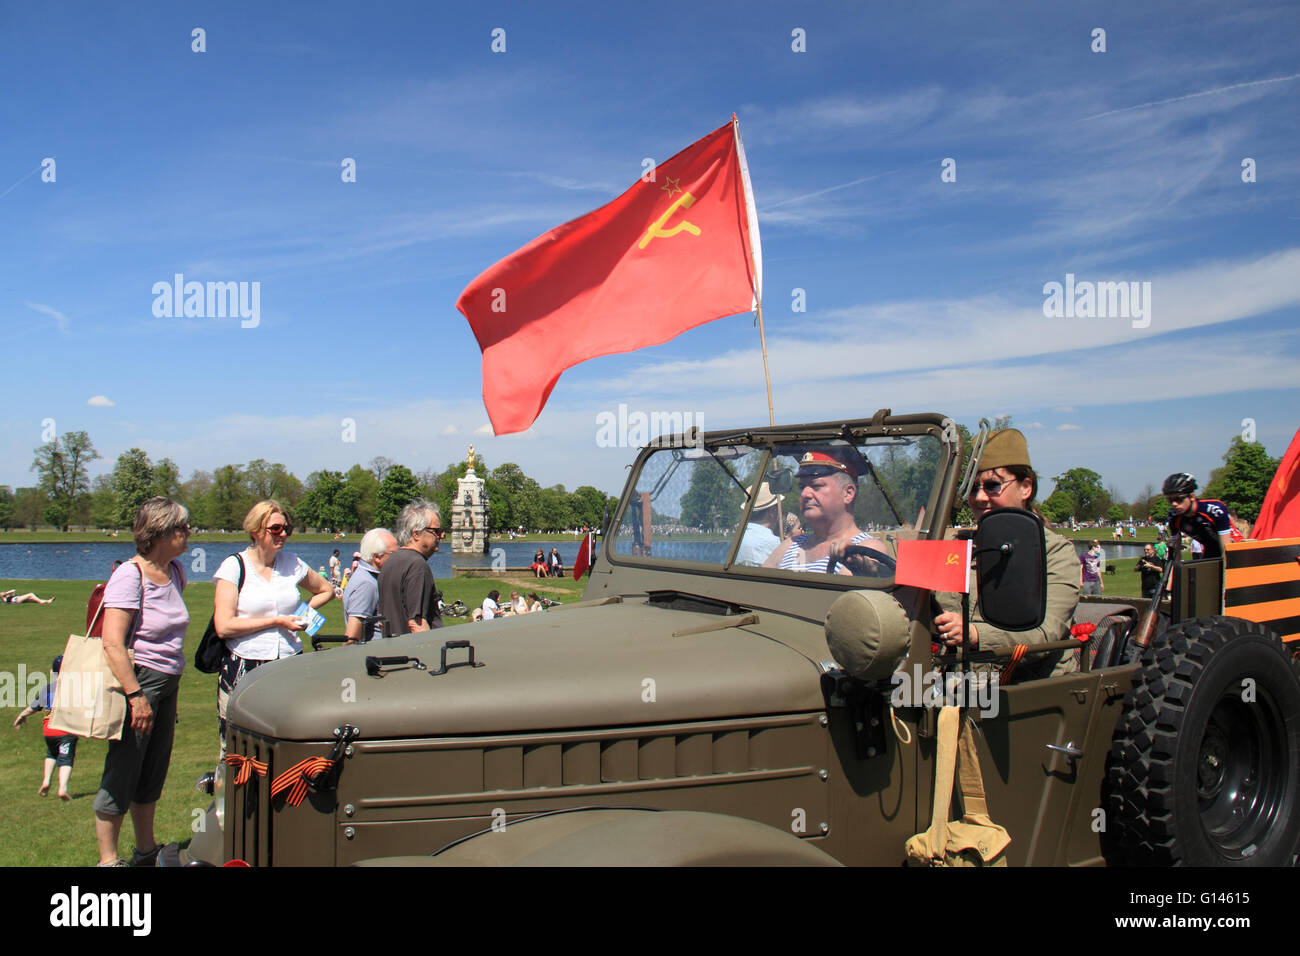 Russian GAZ-69 light truck (1968), Chestnut Sunday, 8th May 2016. Bushy Park, Hampton Court, London Borough of Richmond, England, Great Britain, United Kingdom, UK, Europe. Vintage and classic vehicle parade and displays with fairground attractions and military reenactments. Credit:  Ian Bottle / Alamy Live News Stock Photo